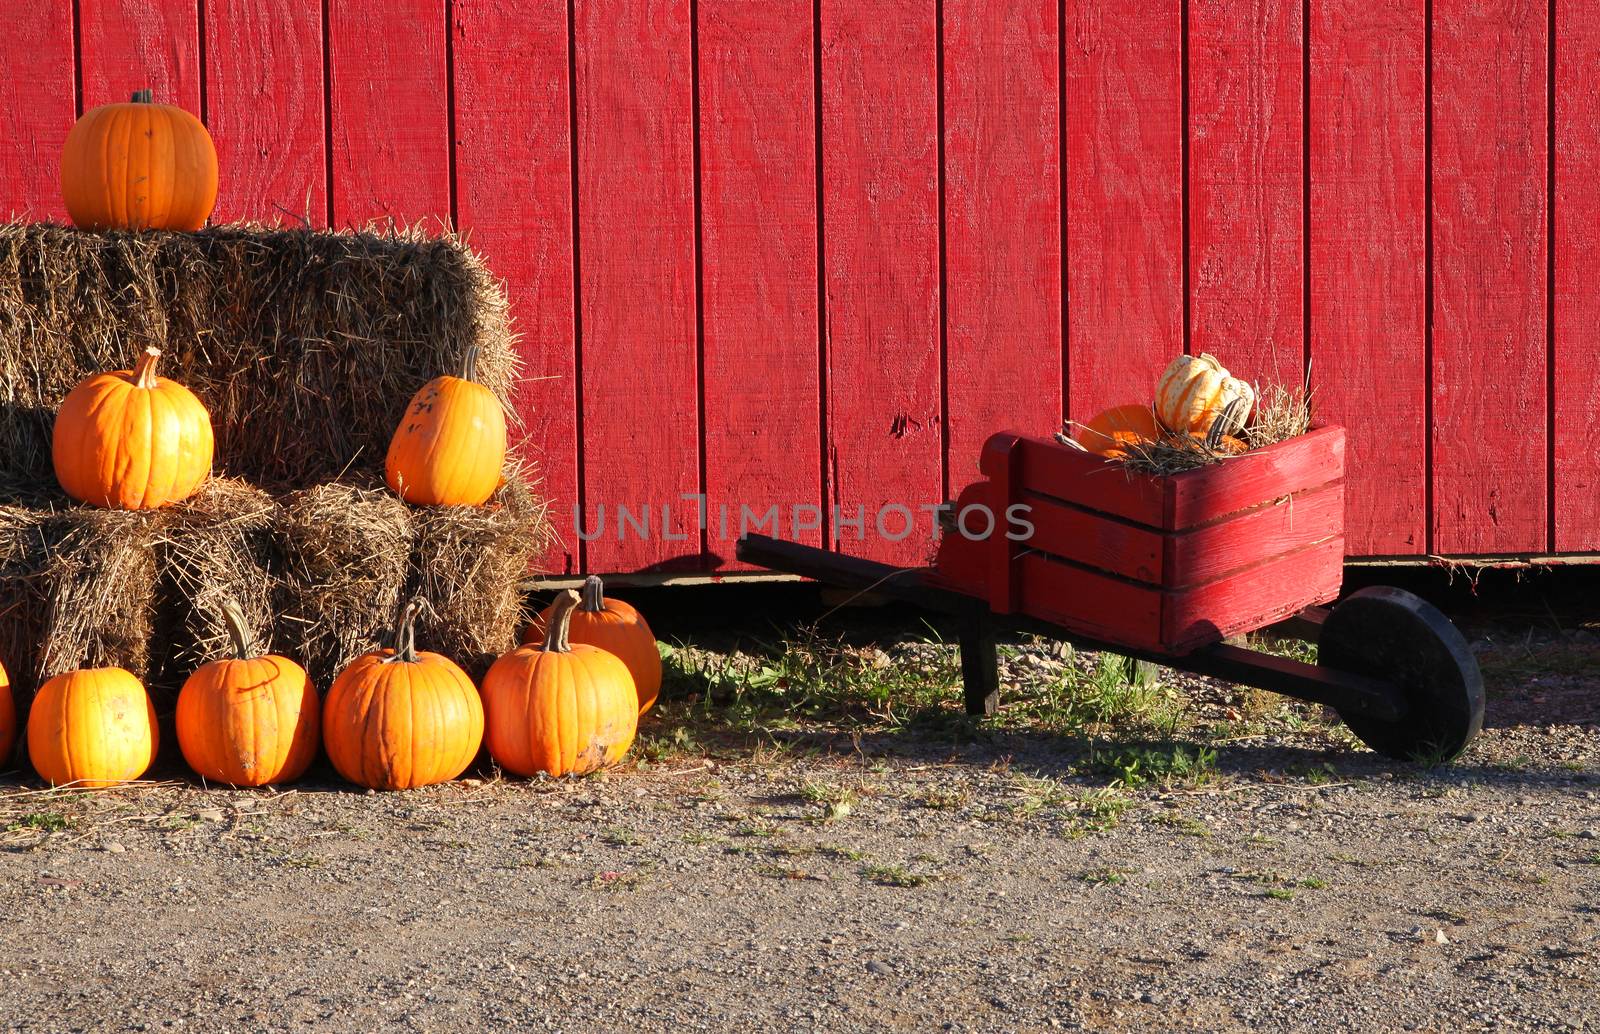 Pumpkins and hay with wheelbarrow by gvictoria